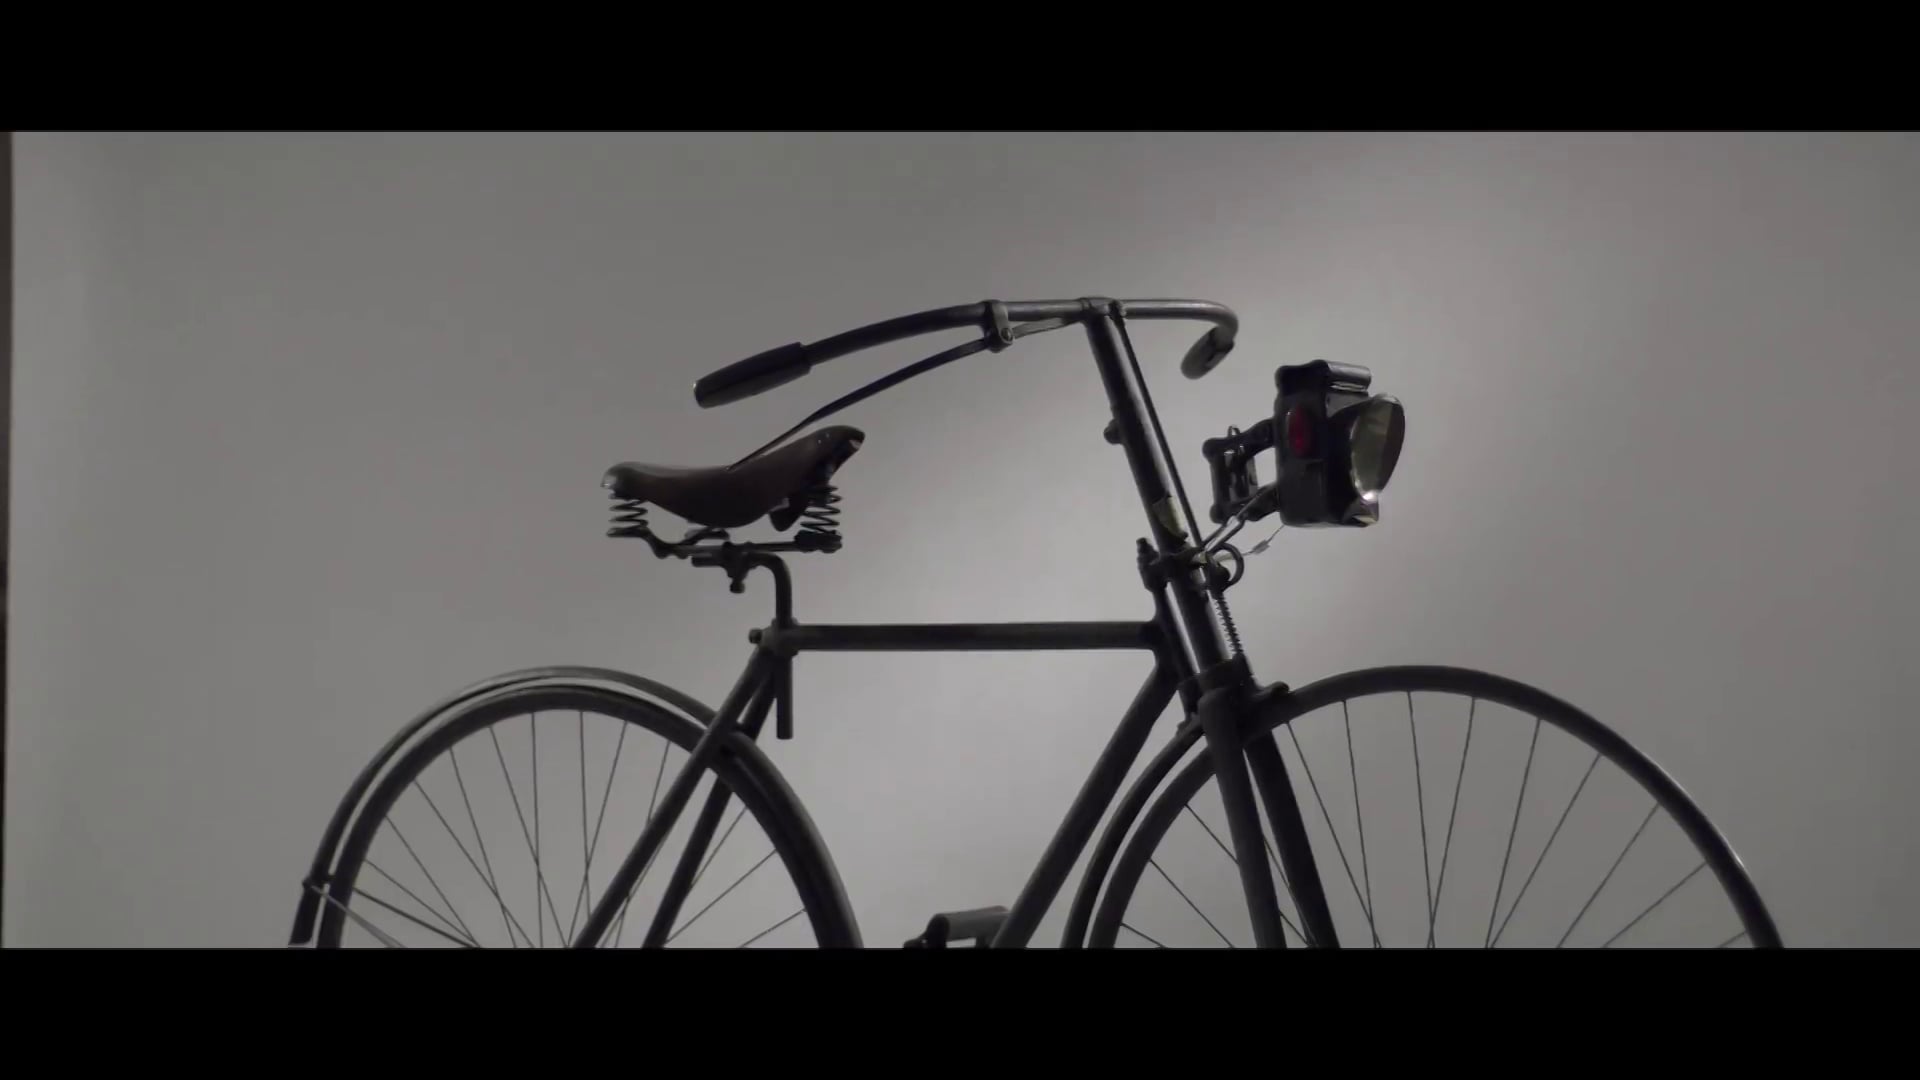 Watch Bicycle The Film Online Vimeo On Demand on Vimeo